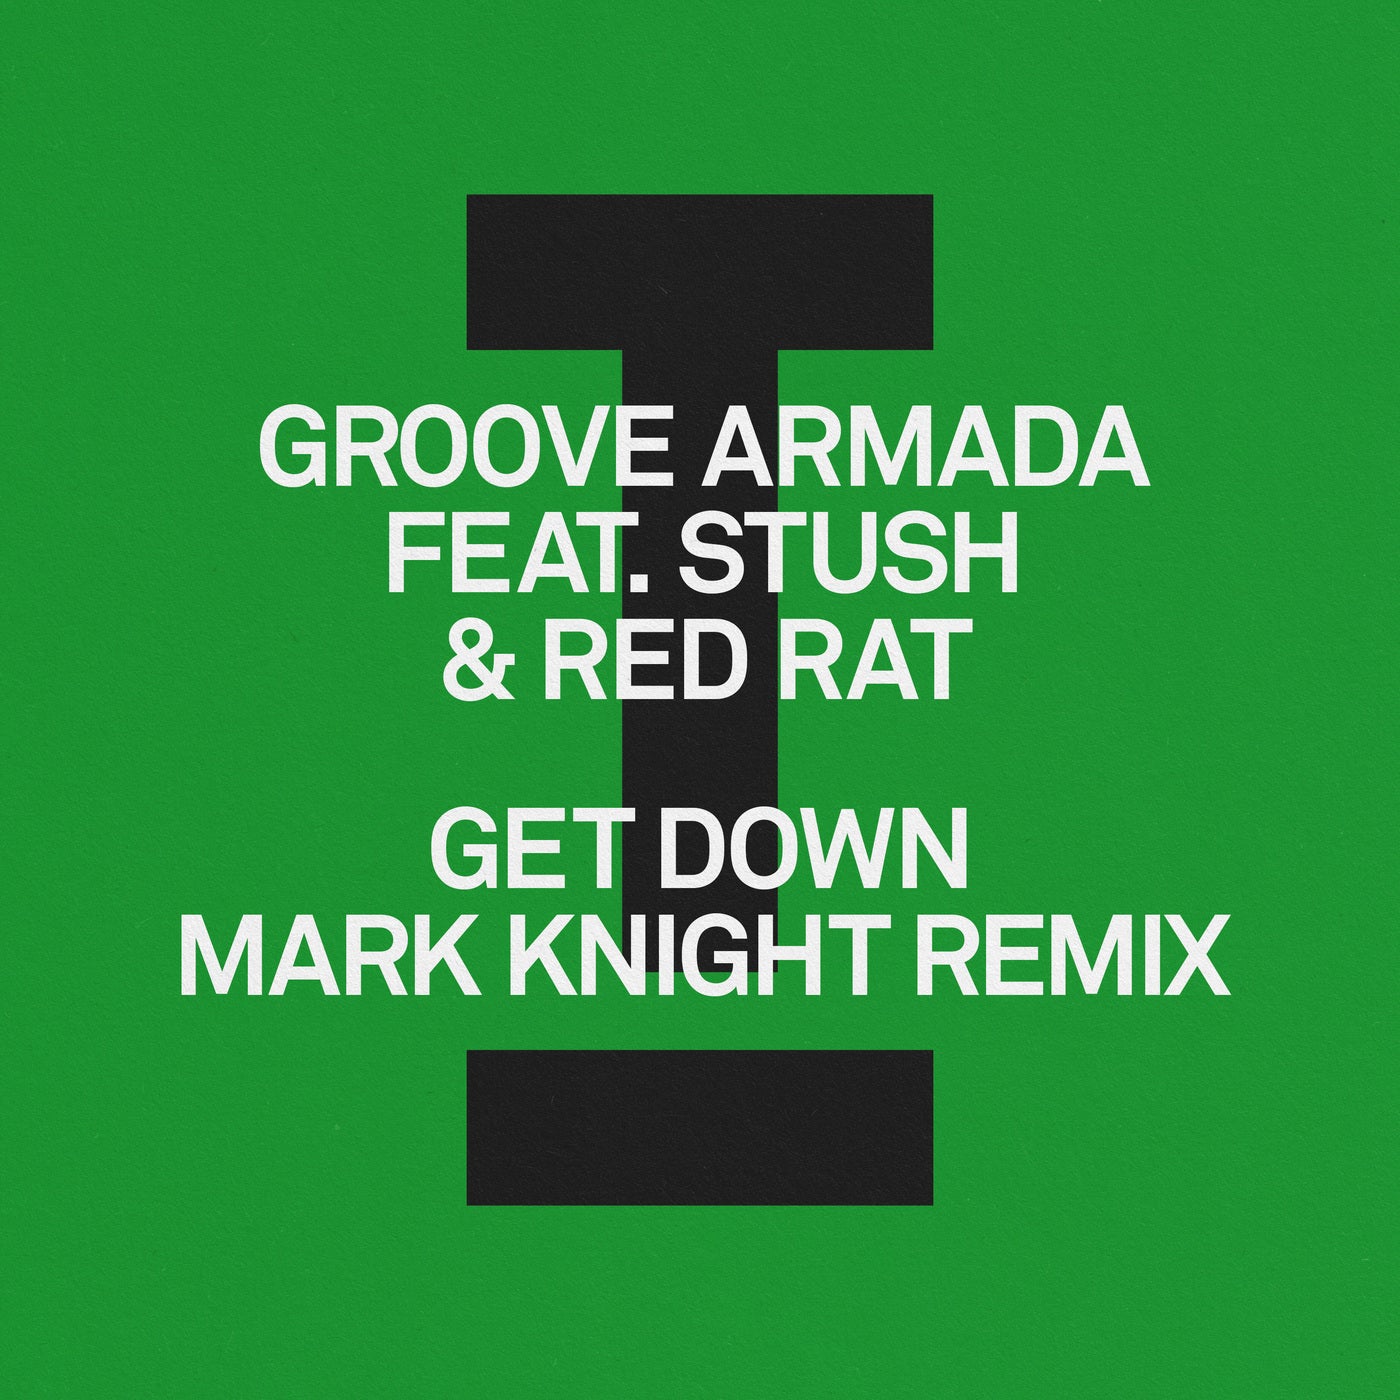 Release Cover: Get Down (Mark Knight Remix) Download Free on Electrobuzz